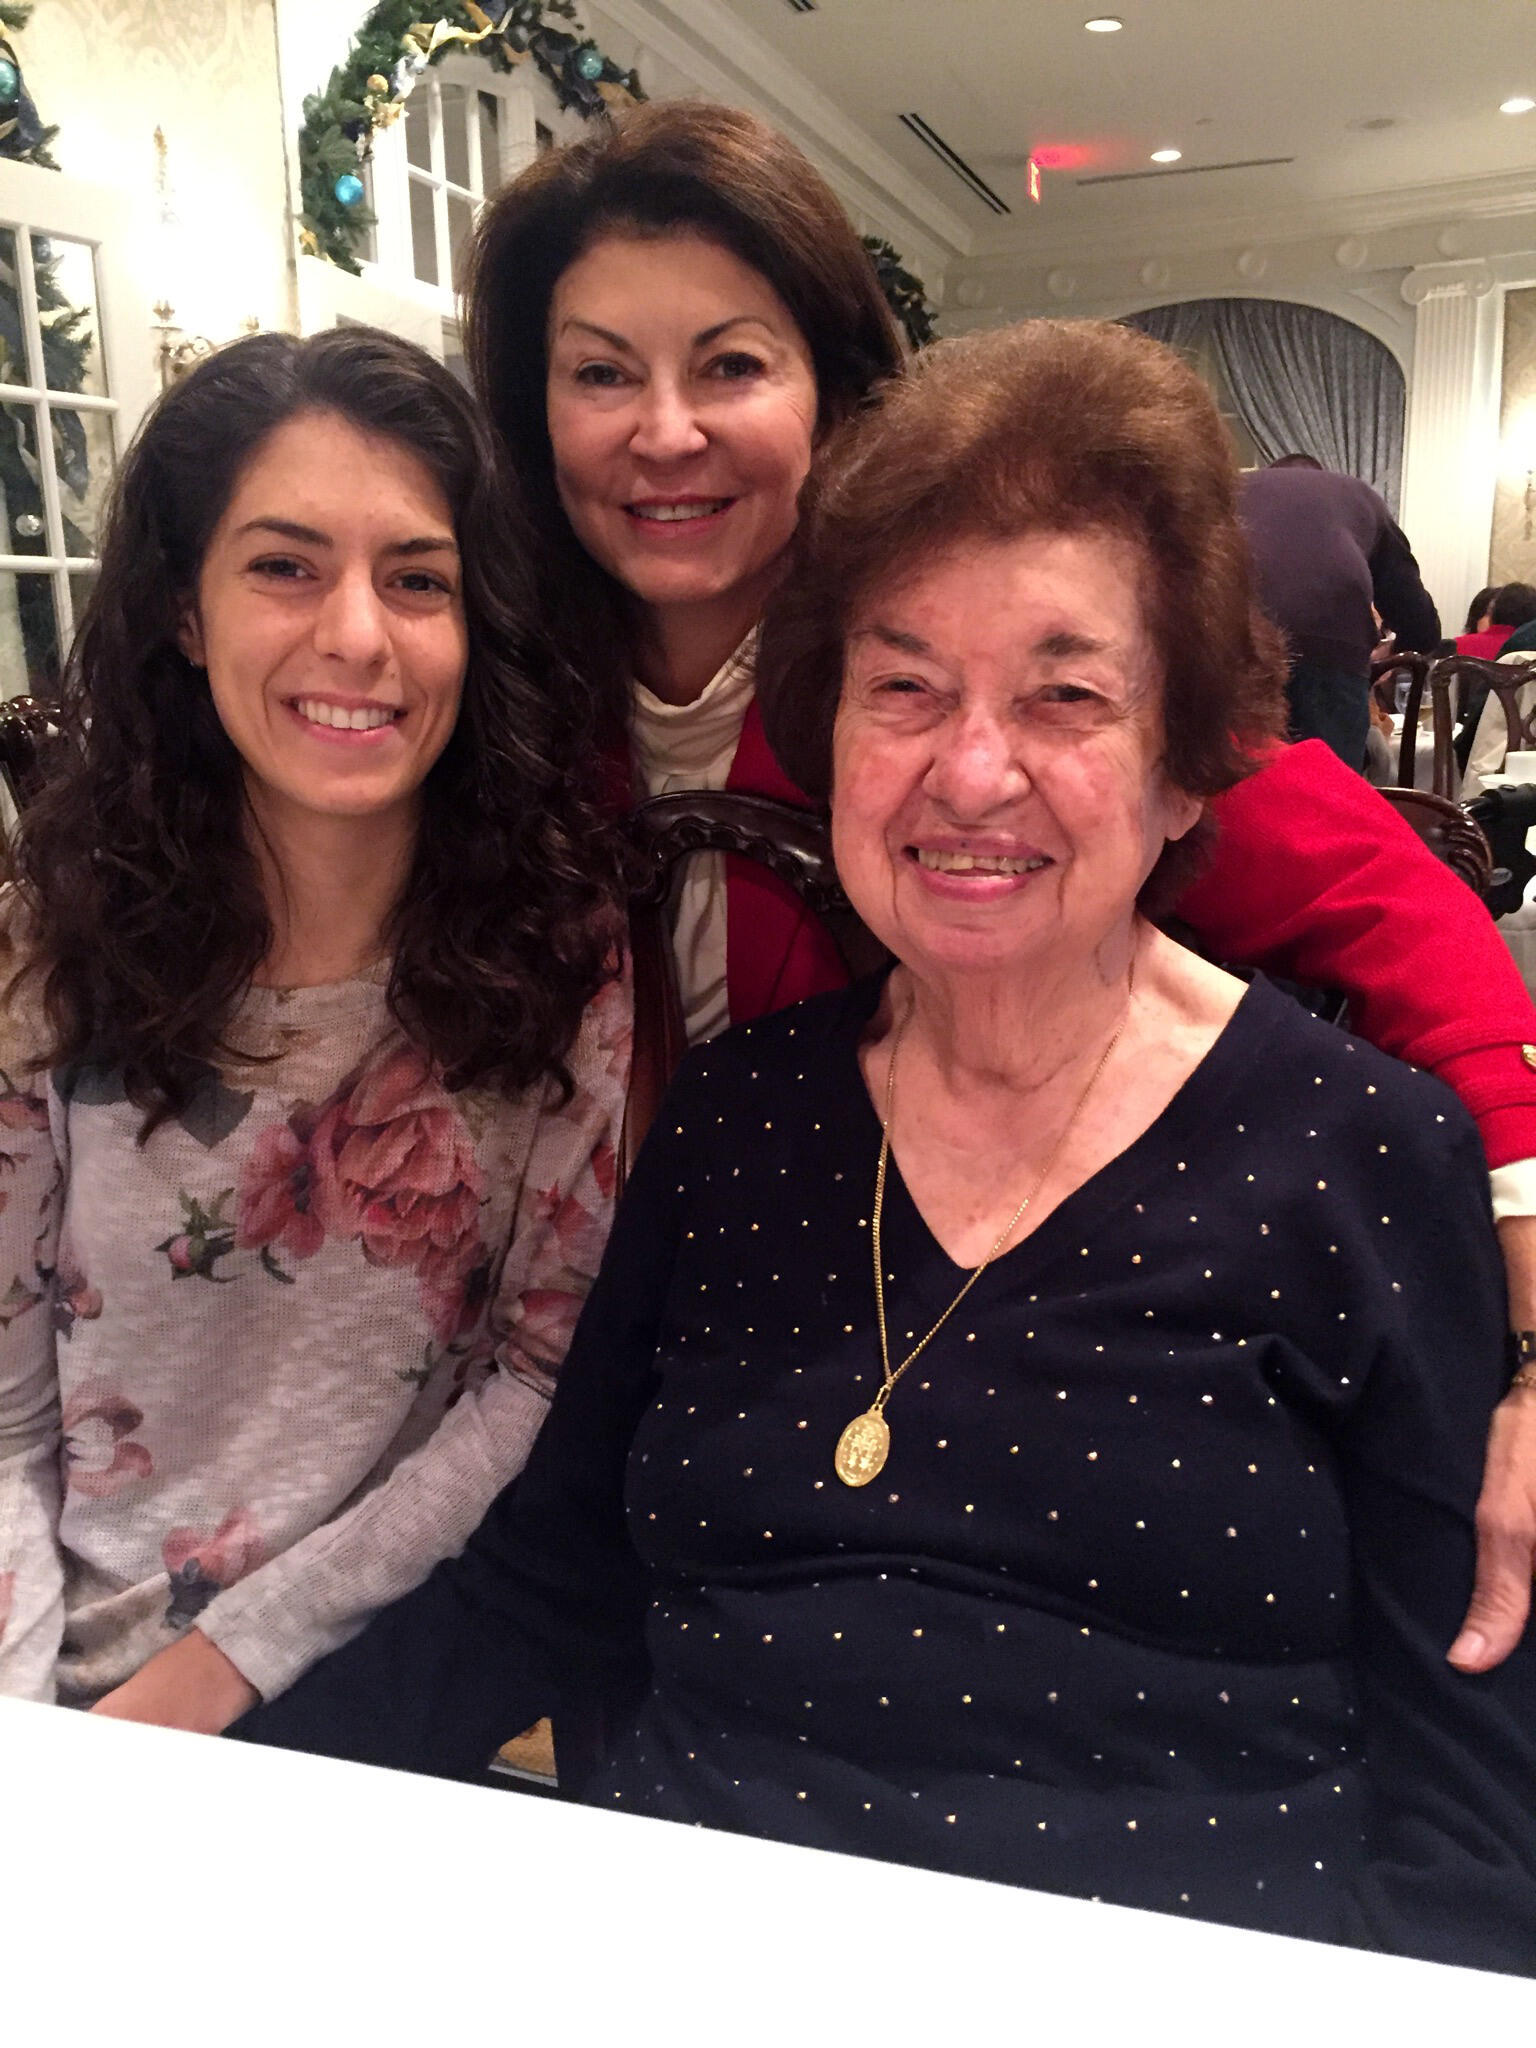 Cristina, with her grandmother, Florencia Perez, M.D., and mother, Lourdes Page, M.D.